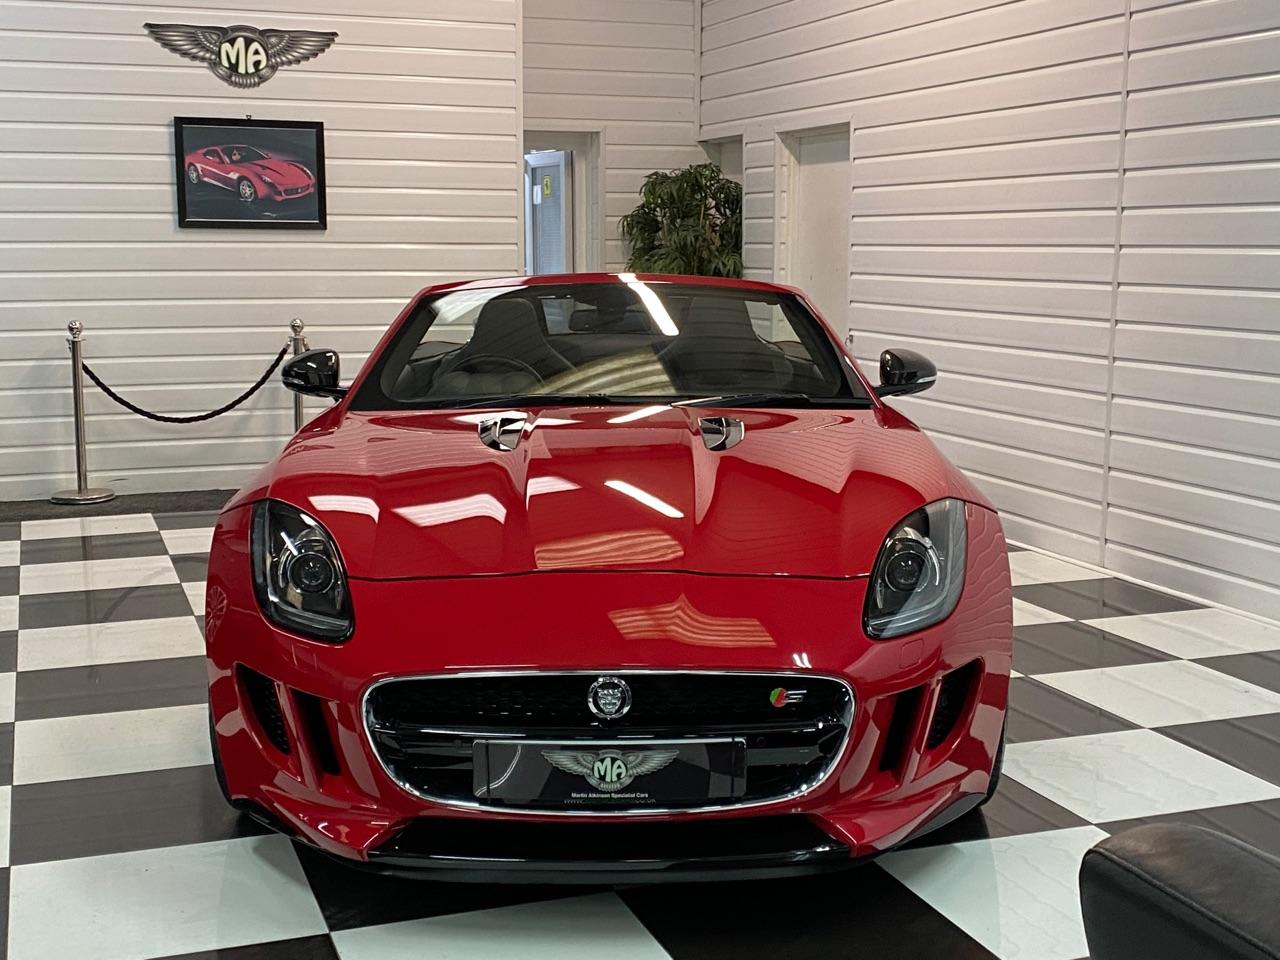 Jaguar F-type 5.0 Supercharged V8 S 2dr Automatic Convertible Petrol Salsa Red